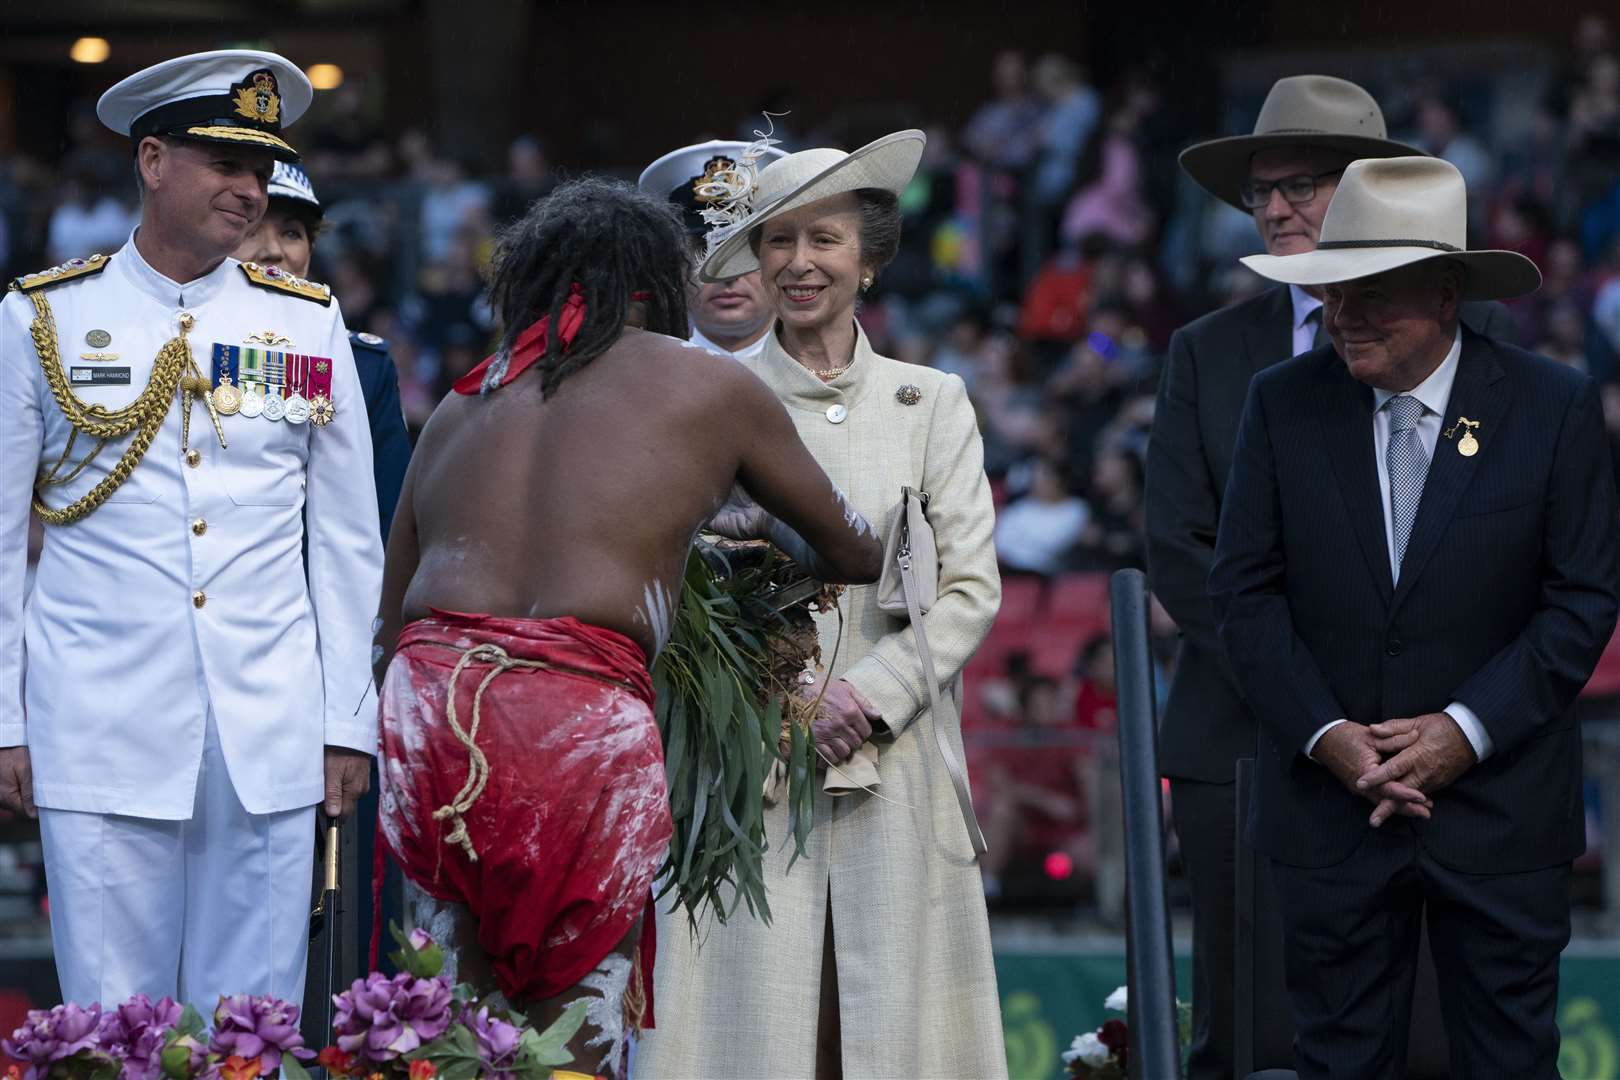 The Princess Royal participates in a smoking ceremony as she is welcomed by Australian Aboriginal performers at the opening ceremony of the Royal Agricultural Society of New South Wales Bicentennial Sydney Royal Easter Show in Sydney (Kirsty O’Connor/PA)